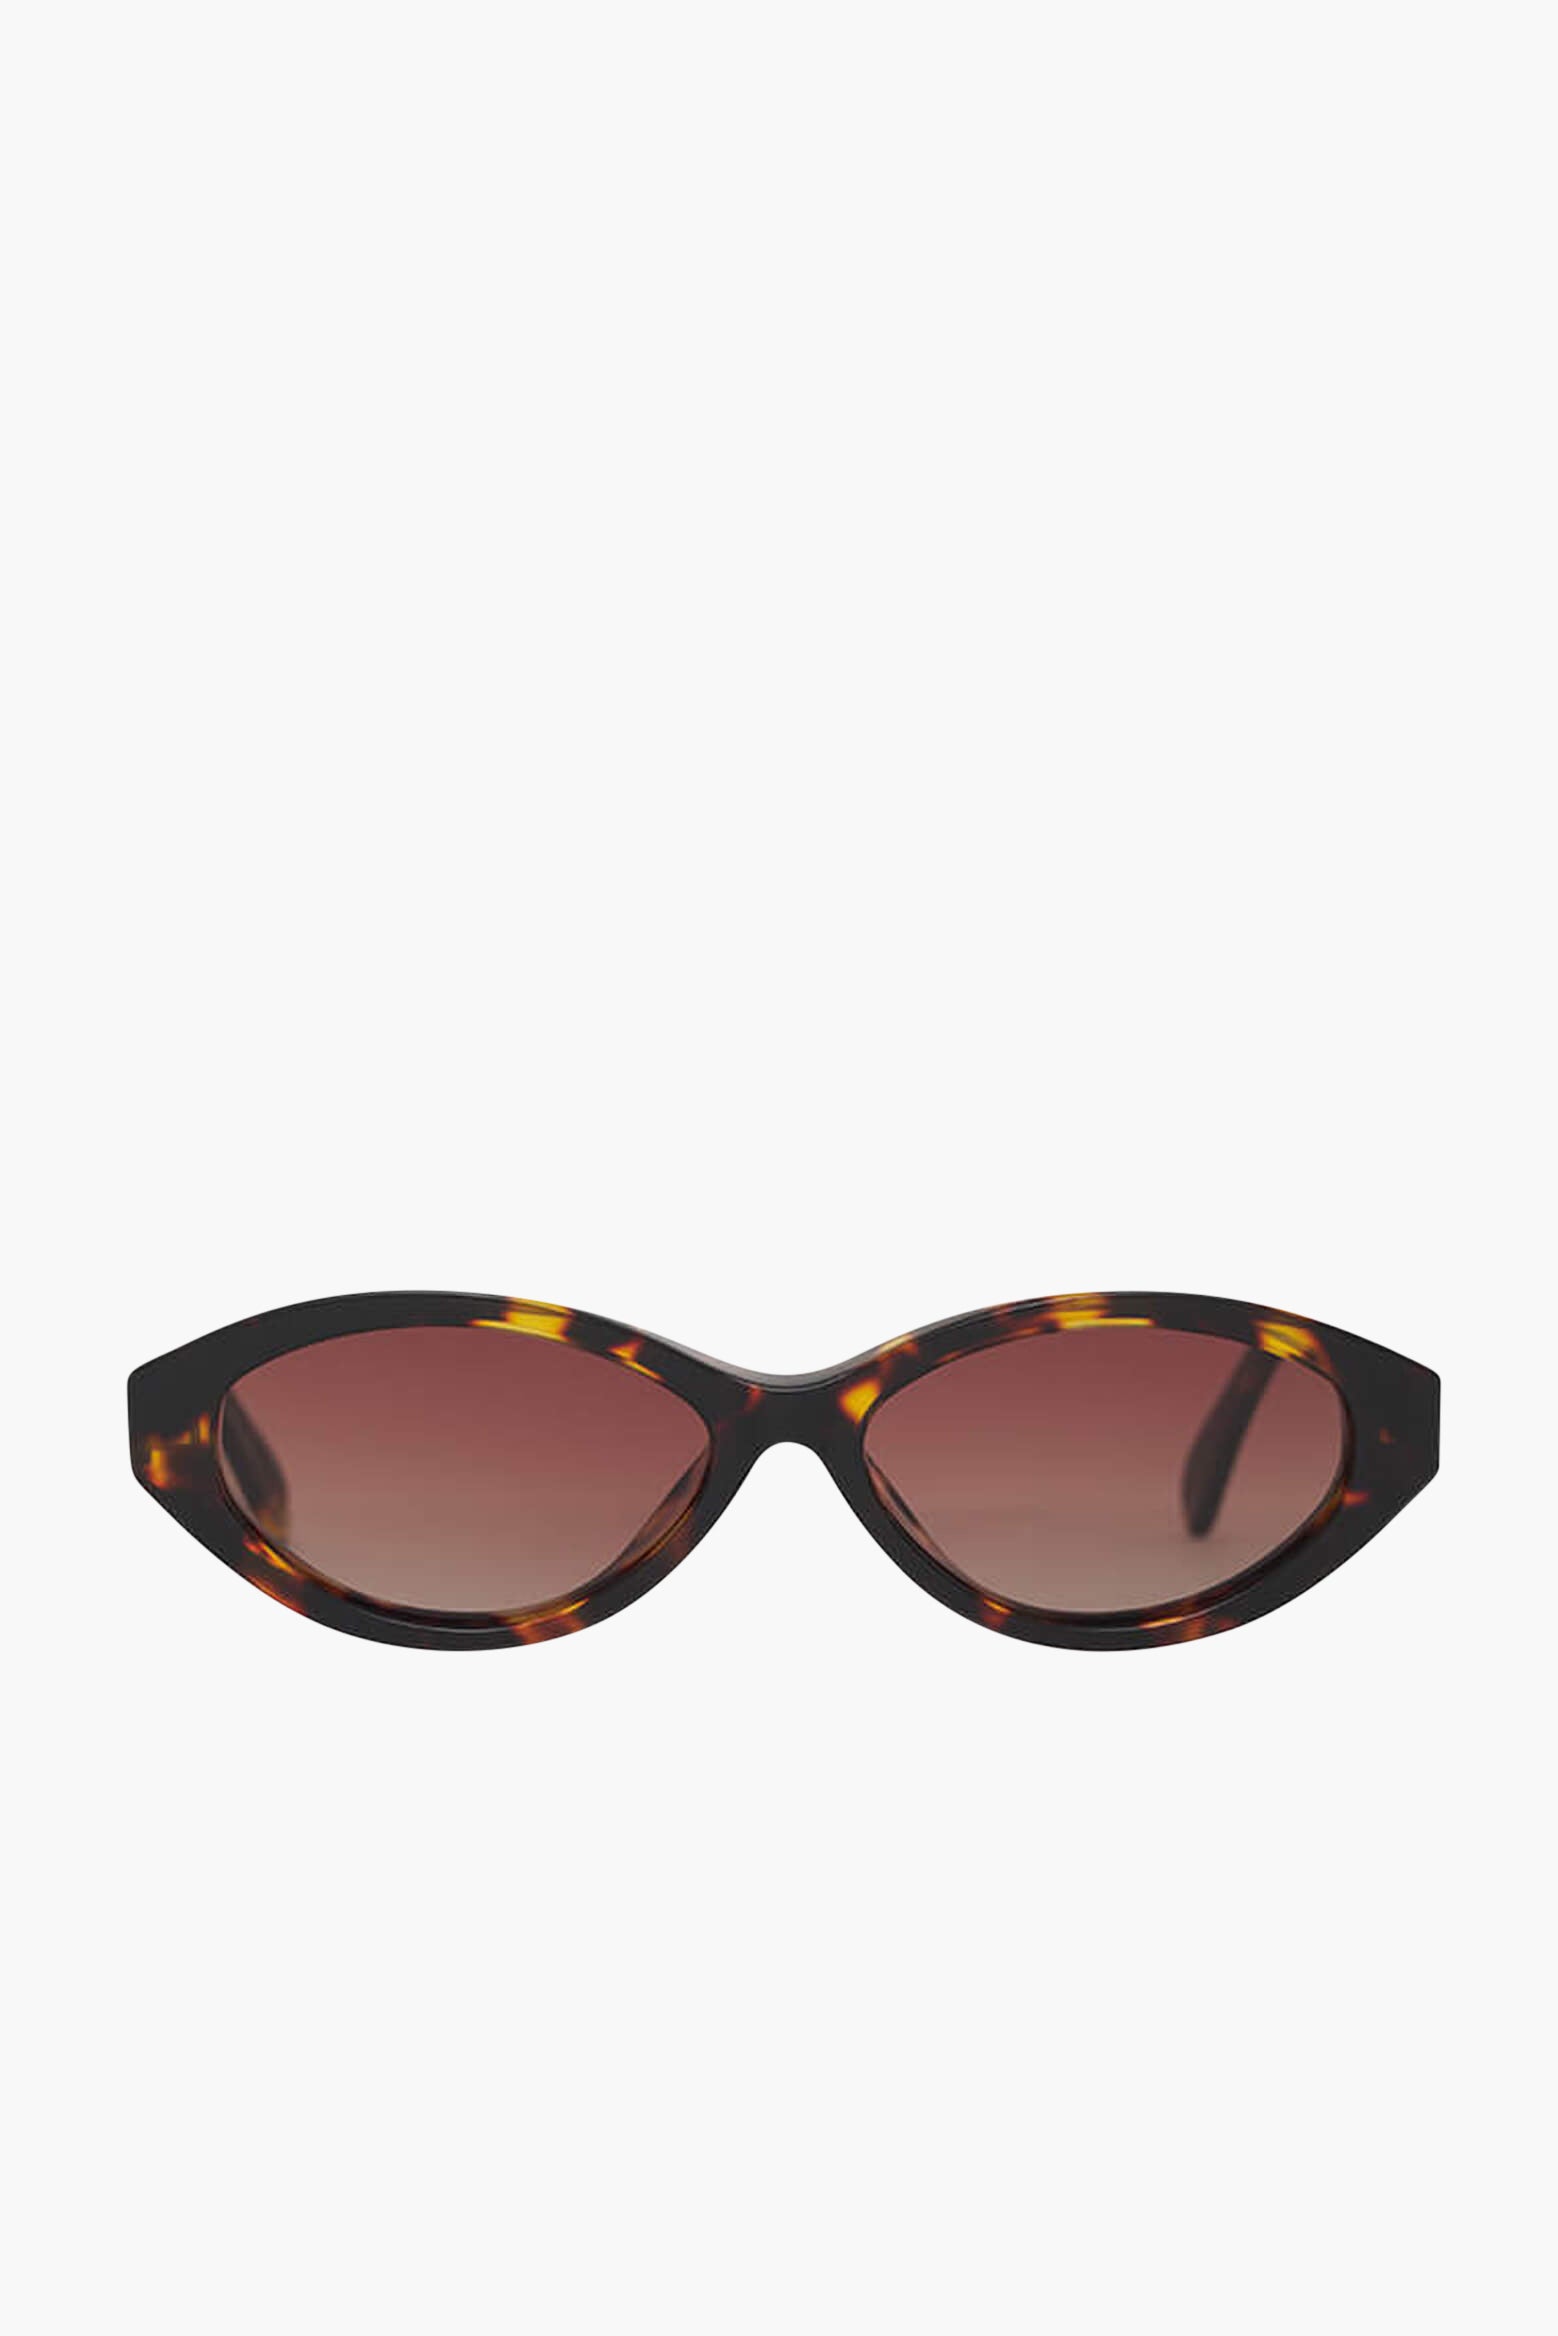 Anine Bing Paris Sunglasses in Dark Tortoise available at TNT The New Trend Australia. Free shipping for orders over $300 AUD.